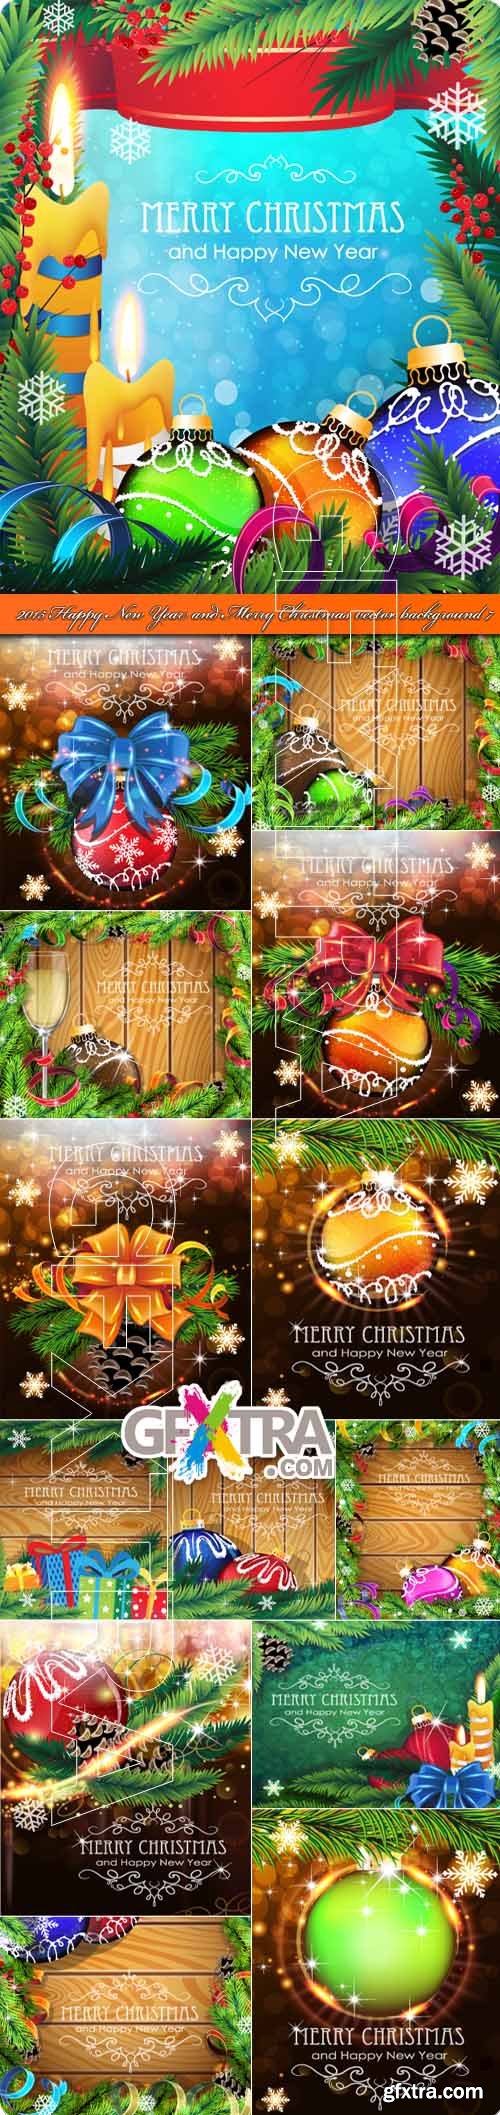 Happy New Year and Merry Christmas vector background 7